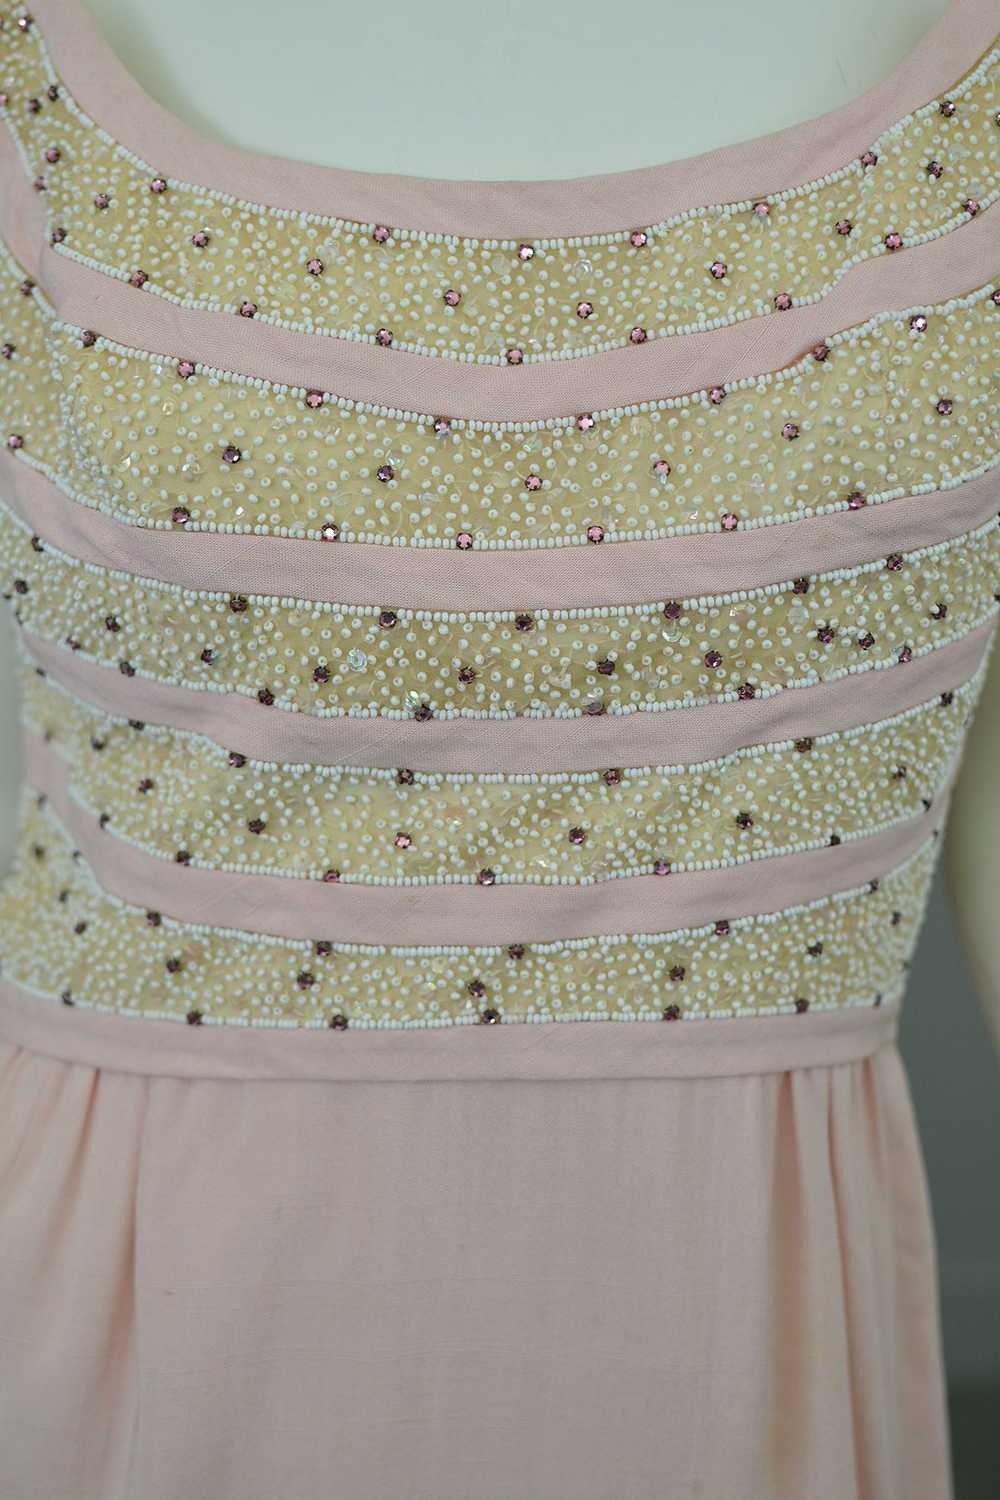 1960s Pale Pink Beaded Short Cocktail Dress - image 2